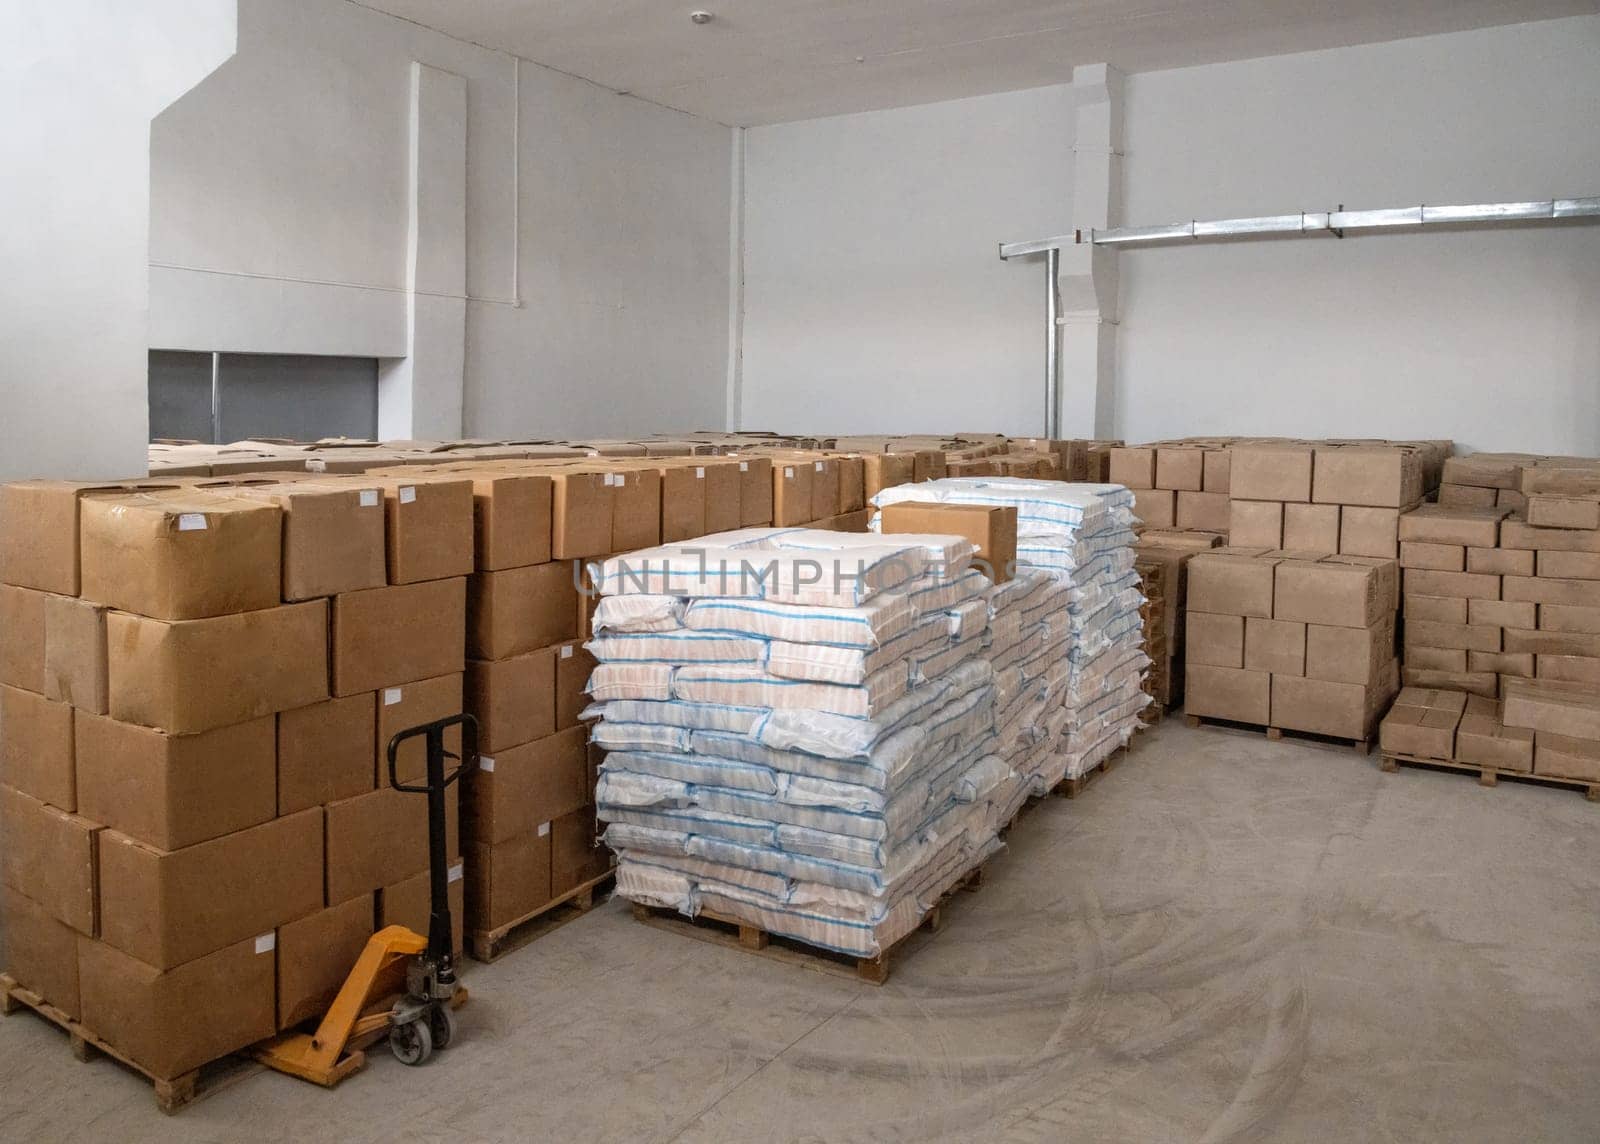 A pile of craft boxes and bags stacked on top of each other and a moving dolly in a white warehouse